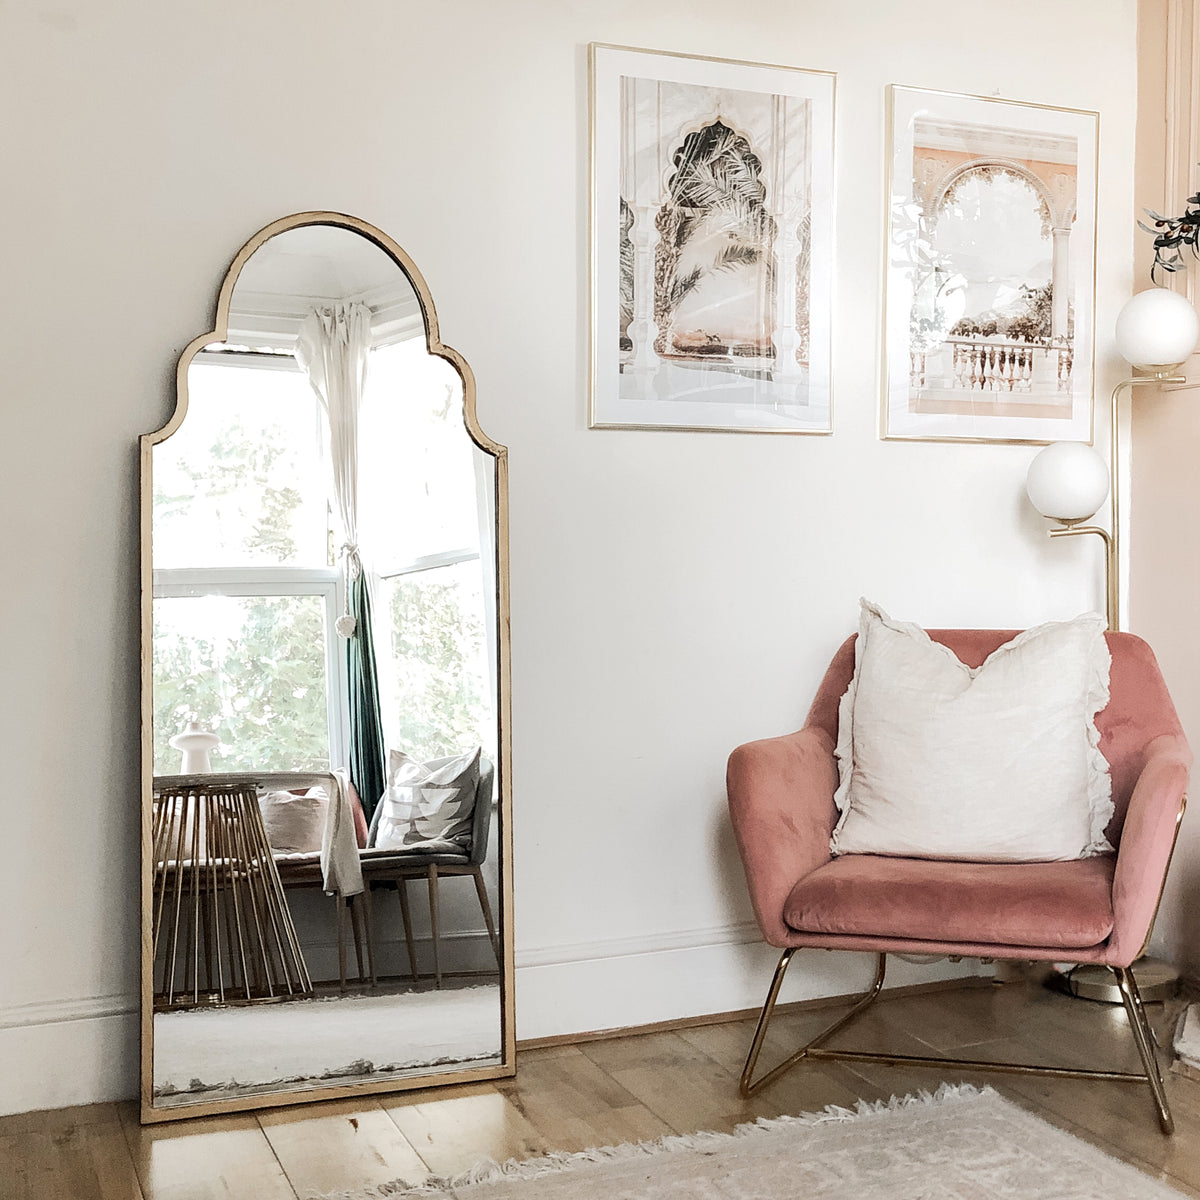 Gold industrial arched full length metal mirror leaning against wall